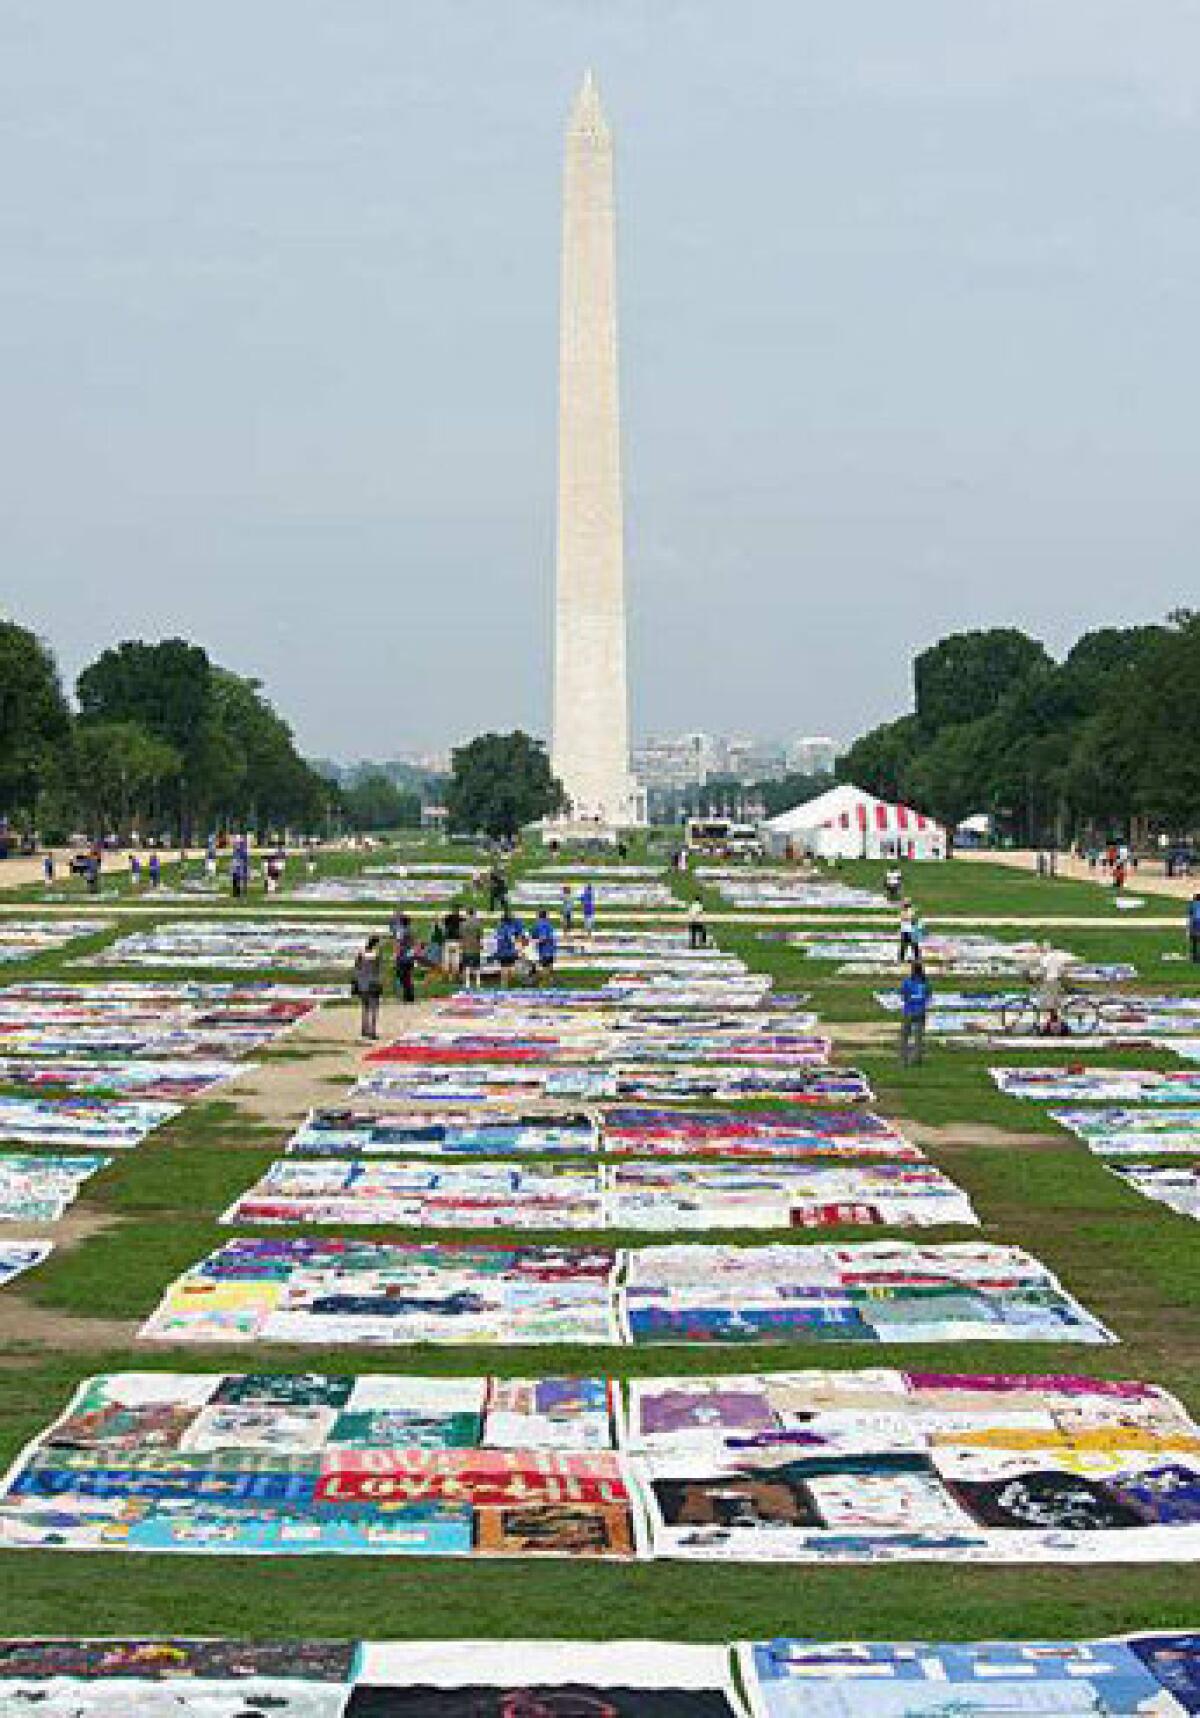 The AIDS Quilt is laid out on the National Mall as part of the 19th International AIDS Conference in Washington. Speakers at the conference discuss progress and challenges.